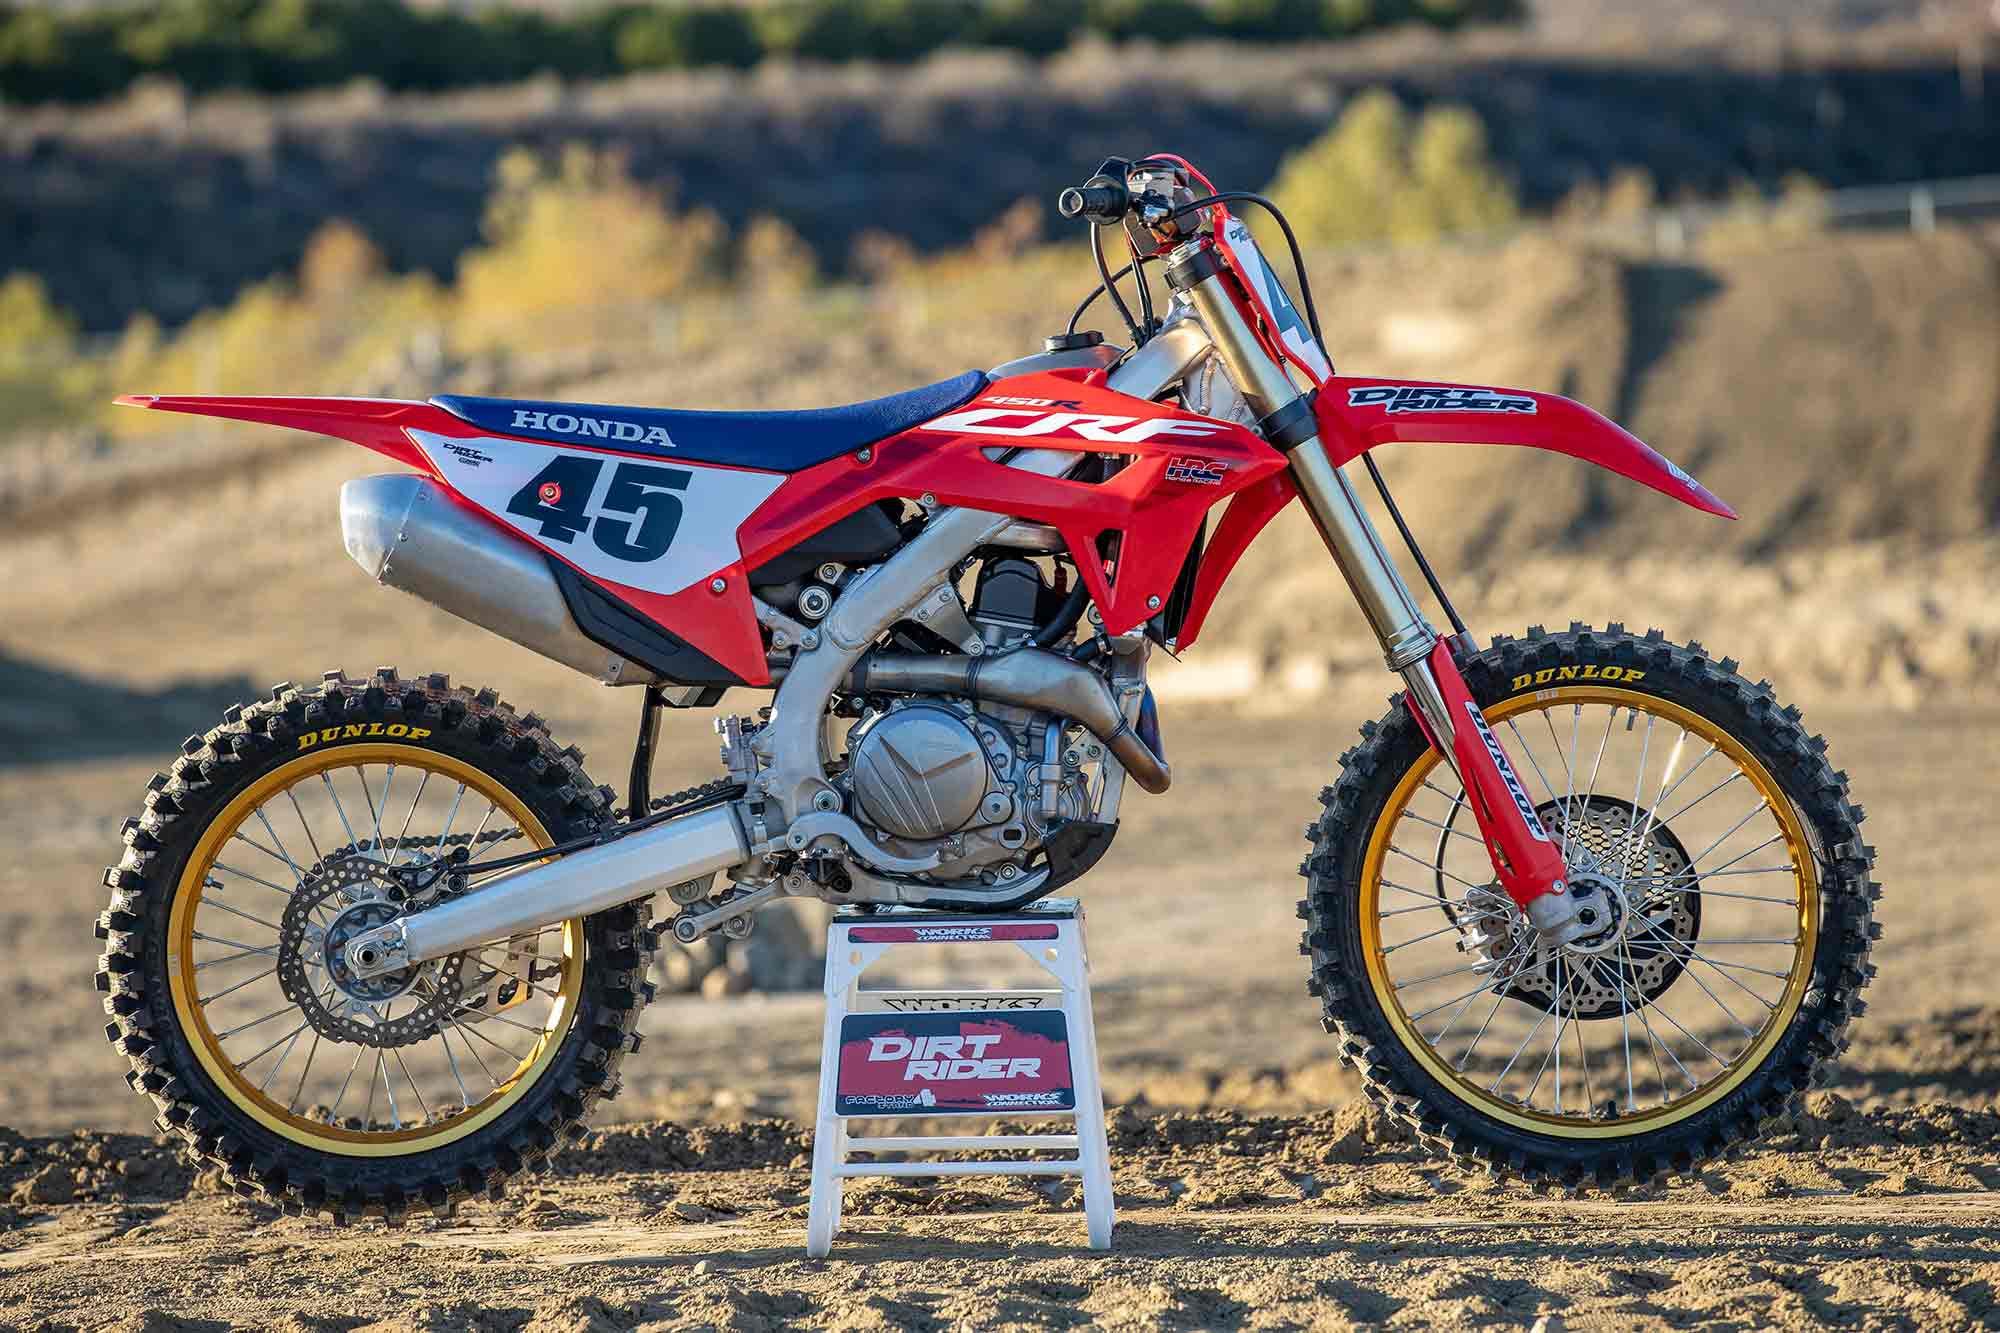 From the outside, Honda’s CRF450R looks identical to last year, save for different radiator shroud graphics and the introduction of the 50th Anniversary Edition colorway pictured here. However, Big Red gave its flagship motocrosser a mid-generation update with notable engine, suspension, and chassis revisions.